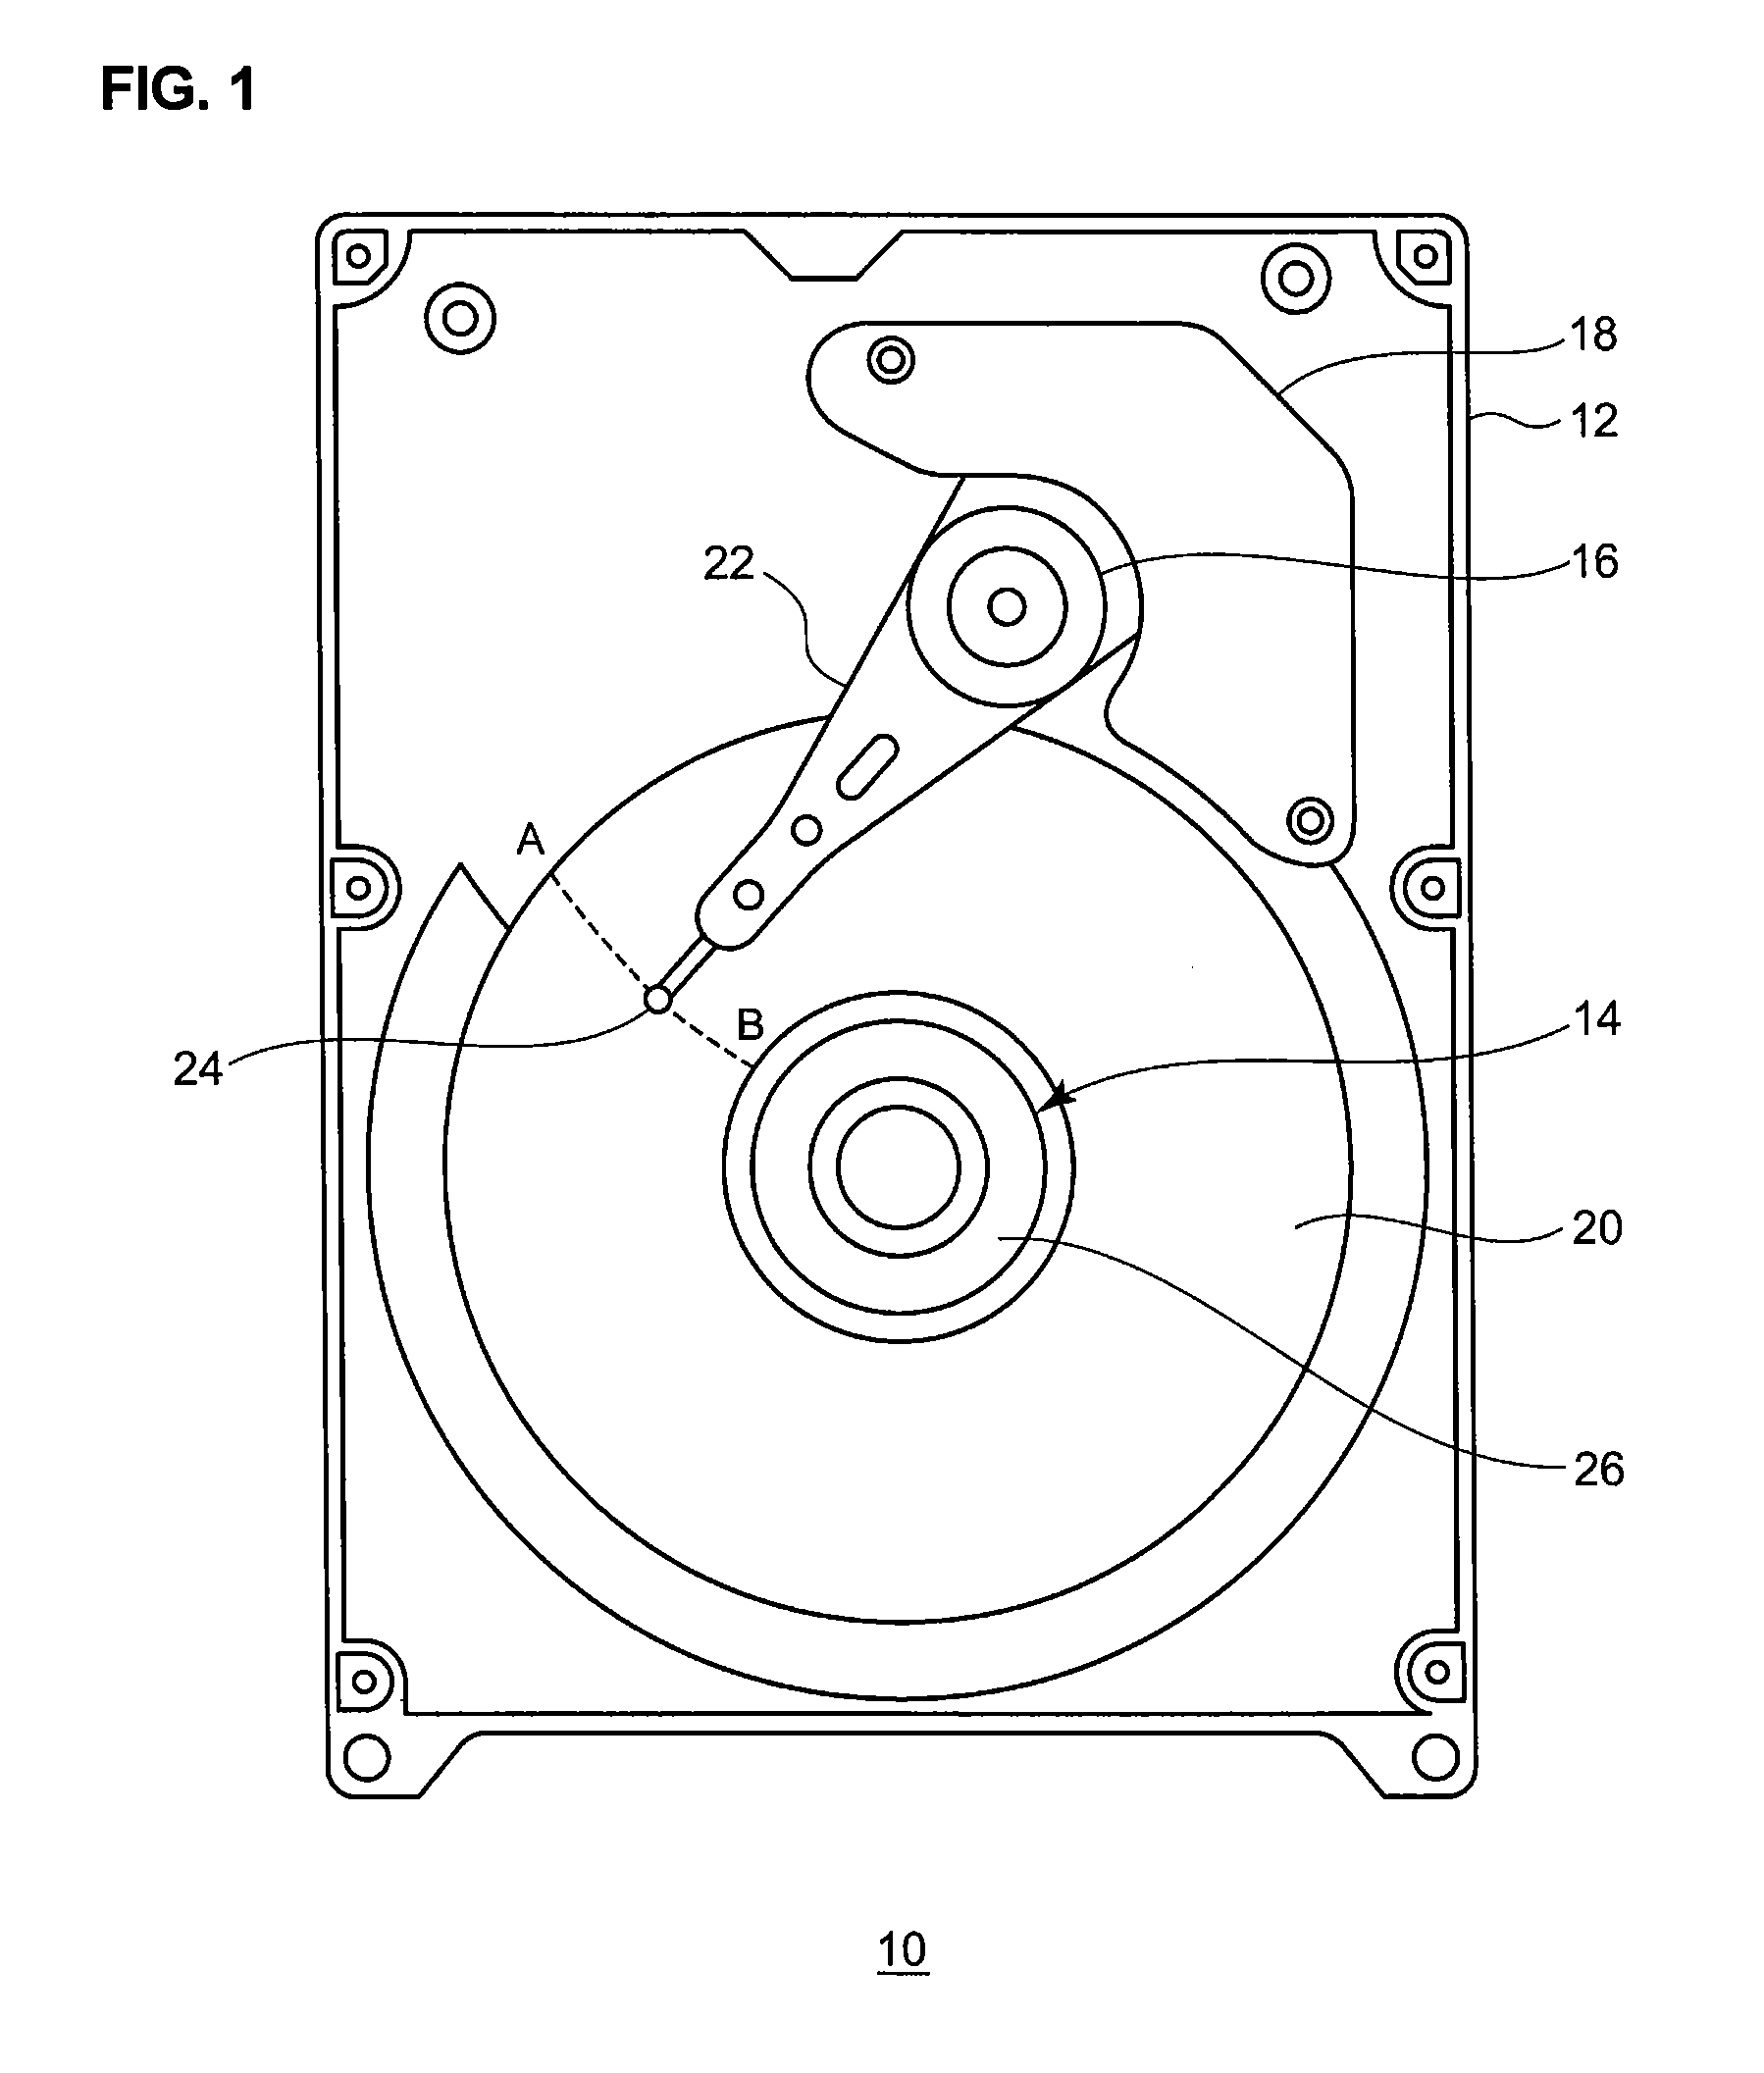 Method of manufacturing a disk drive having a base member, bearing unit, drive unit and hub